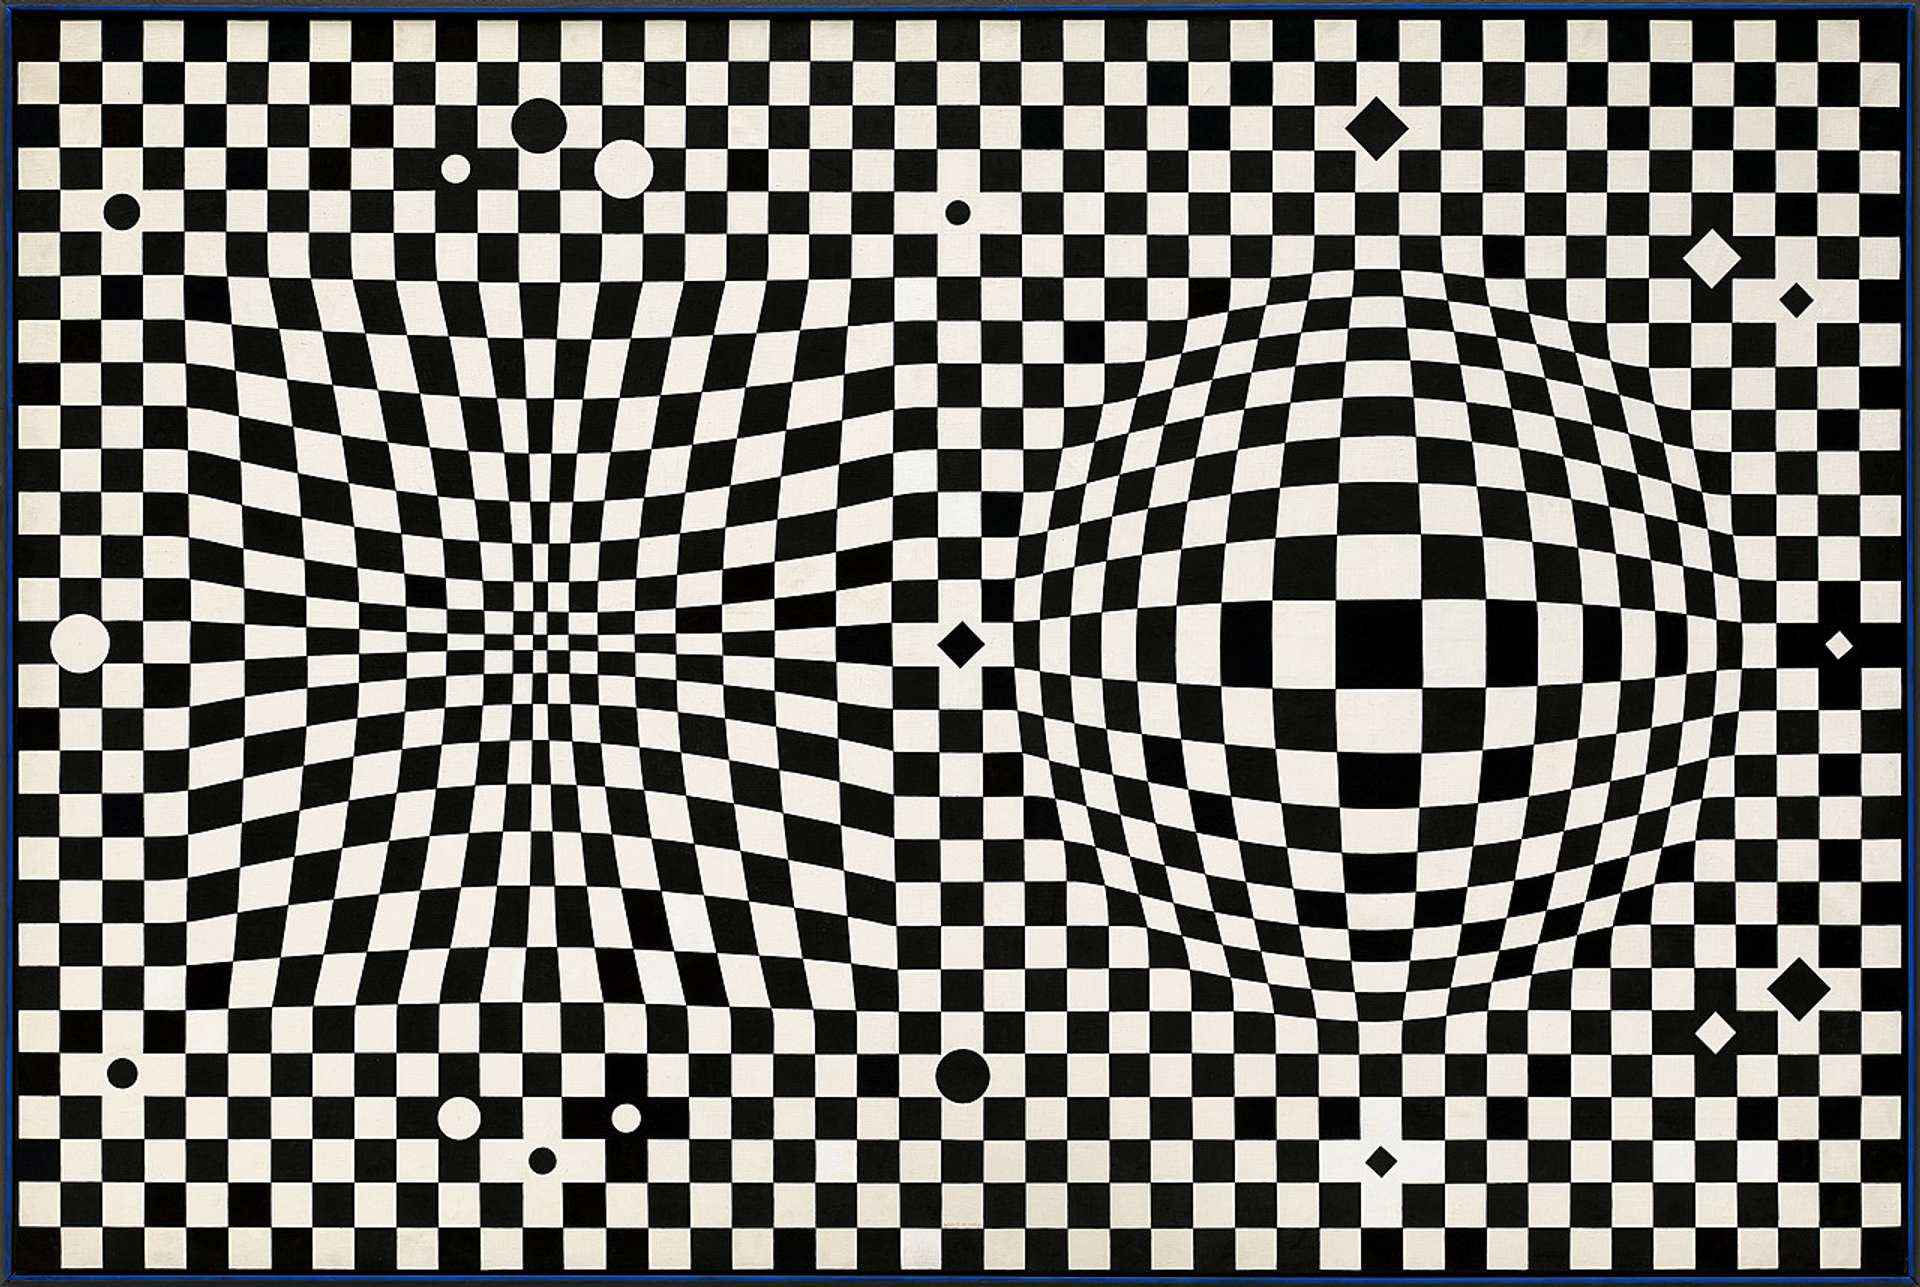 An abstract optical illusionary work featuring tessilating black-and-white sqaures in various sizes creating movement throughout the work.